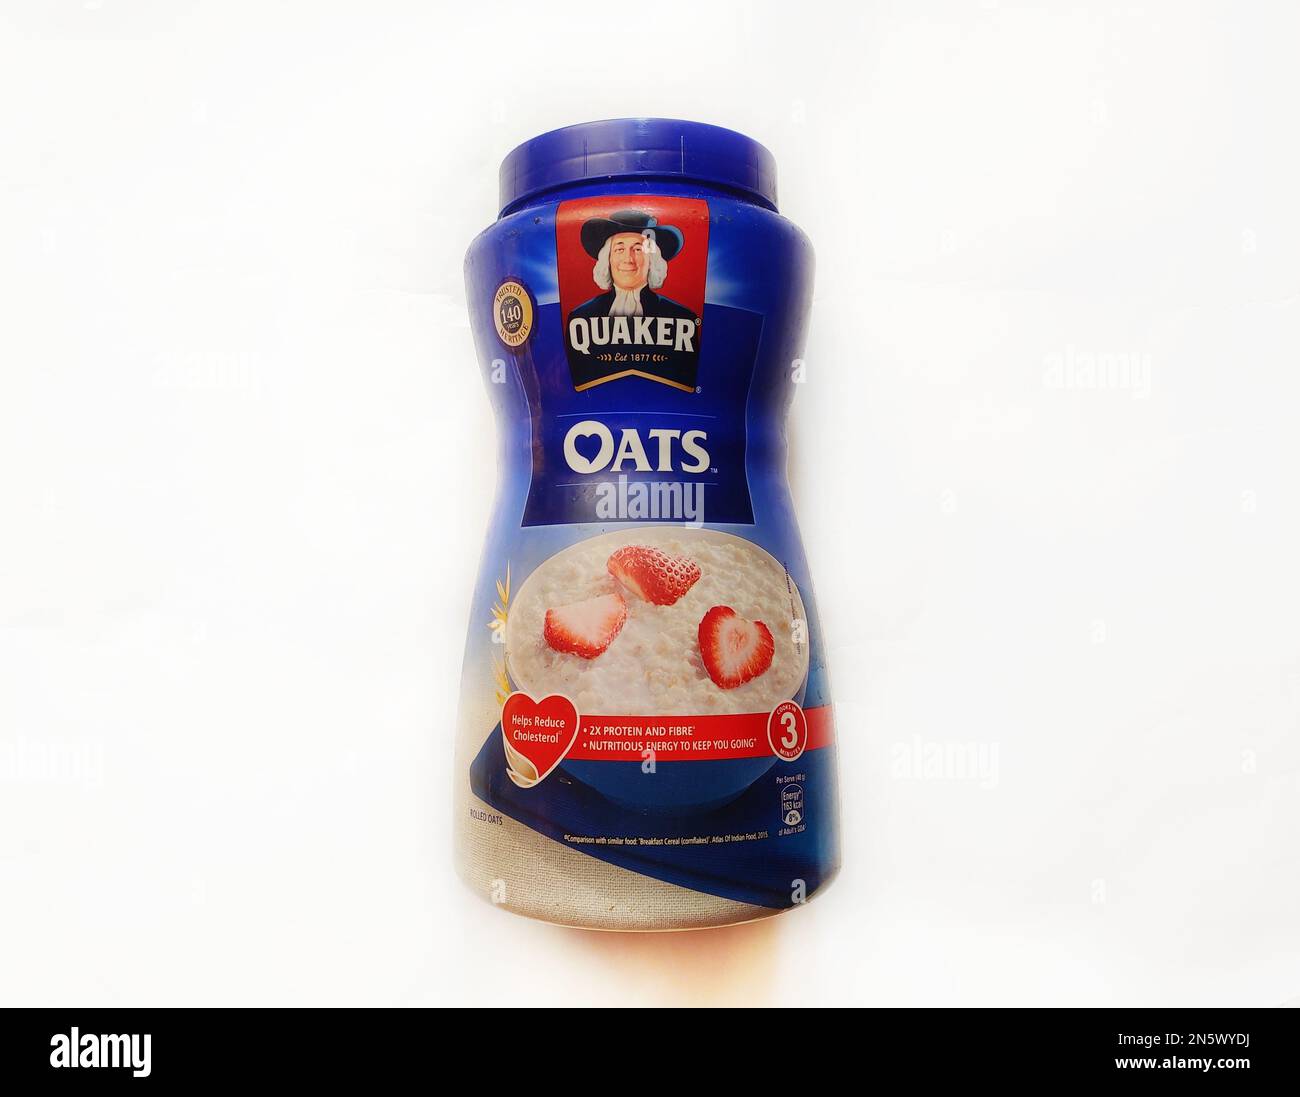 https://c8.alamy.com/comp/2N5WYDJ/quaker-oats-rolled-oats-natural-wholegrain-container-in-isolated-background-2N5WYDJ.jpg